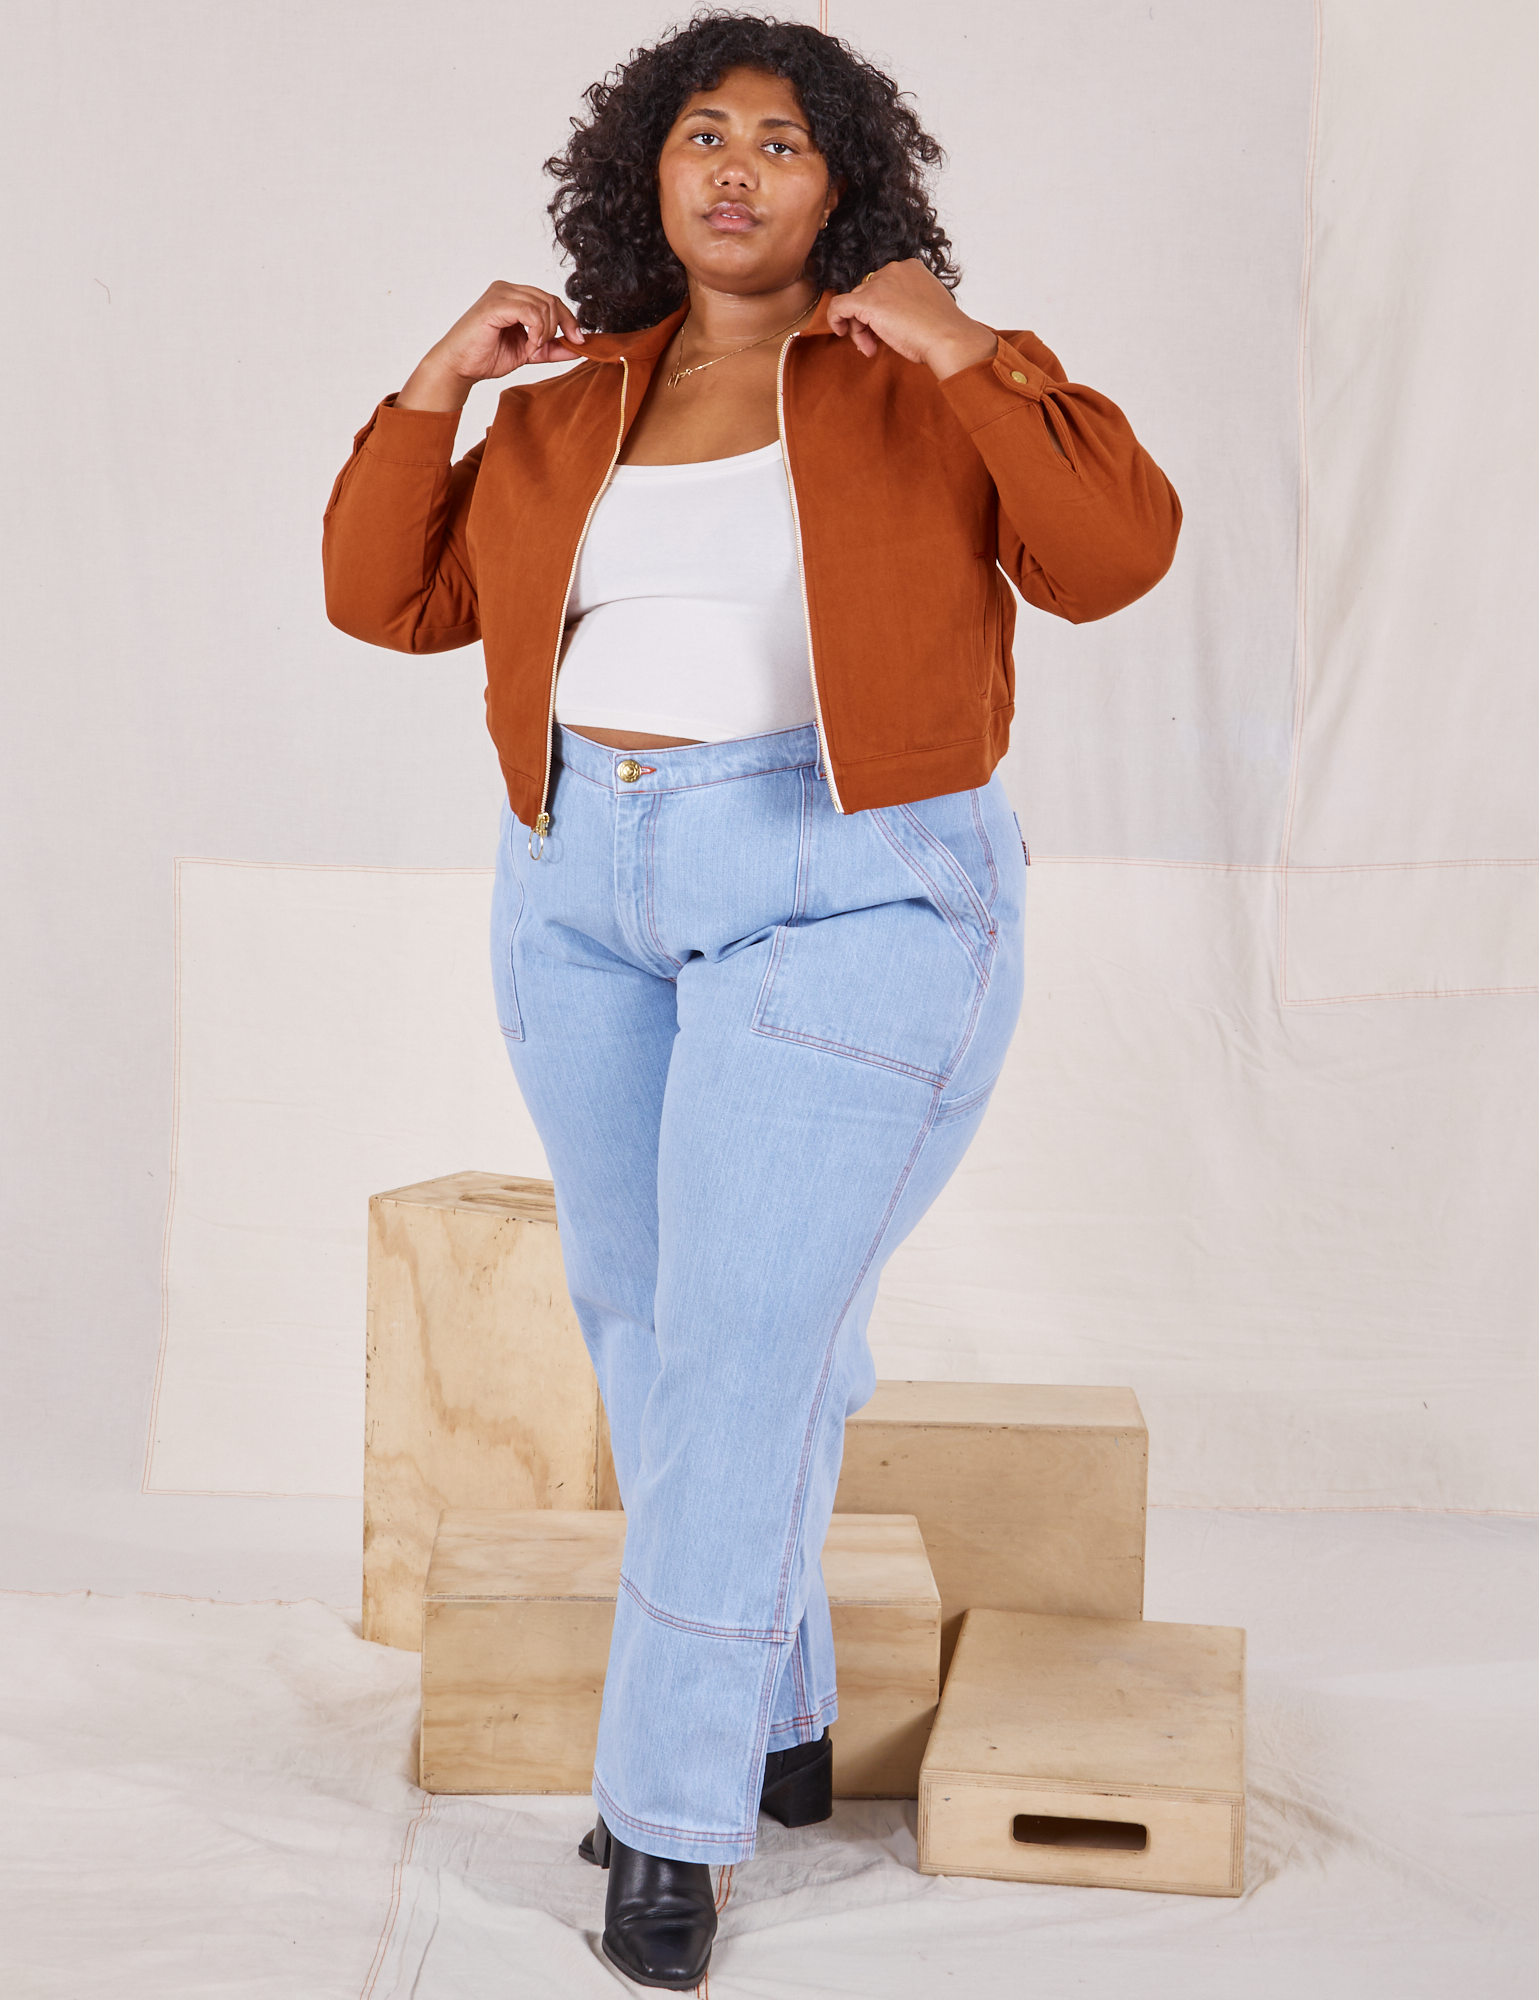 Morgan is wearing Ricky Jacket in Burnt Terracotta with a vintage off-white cami and light wash Carpenter Jeans